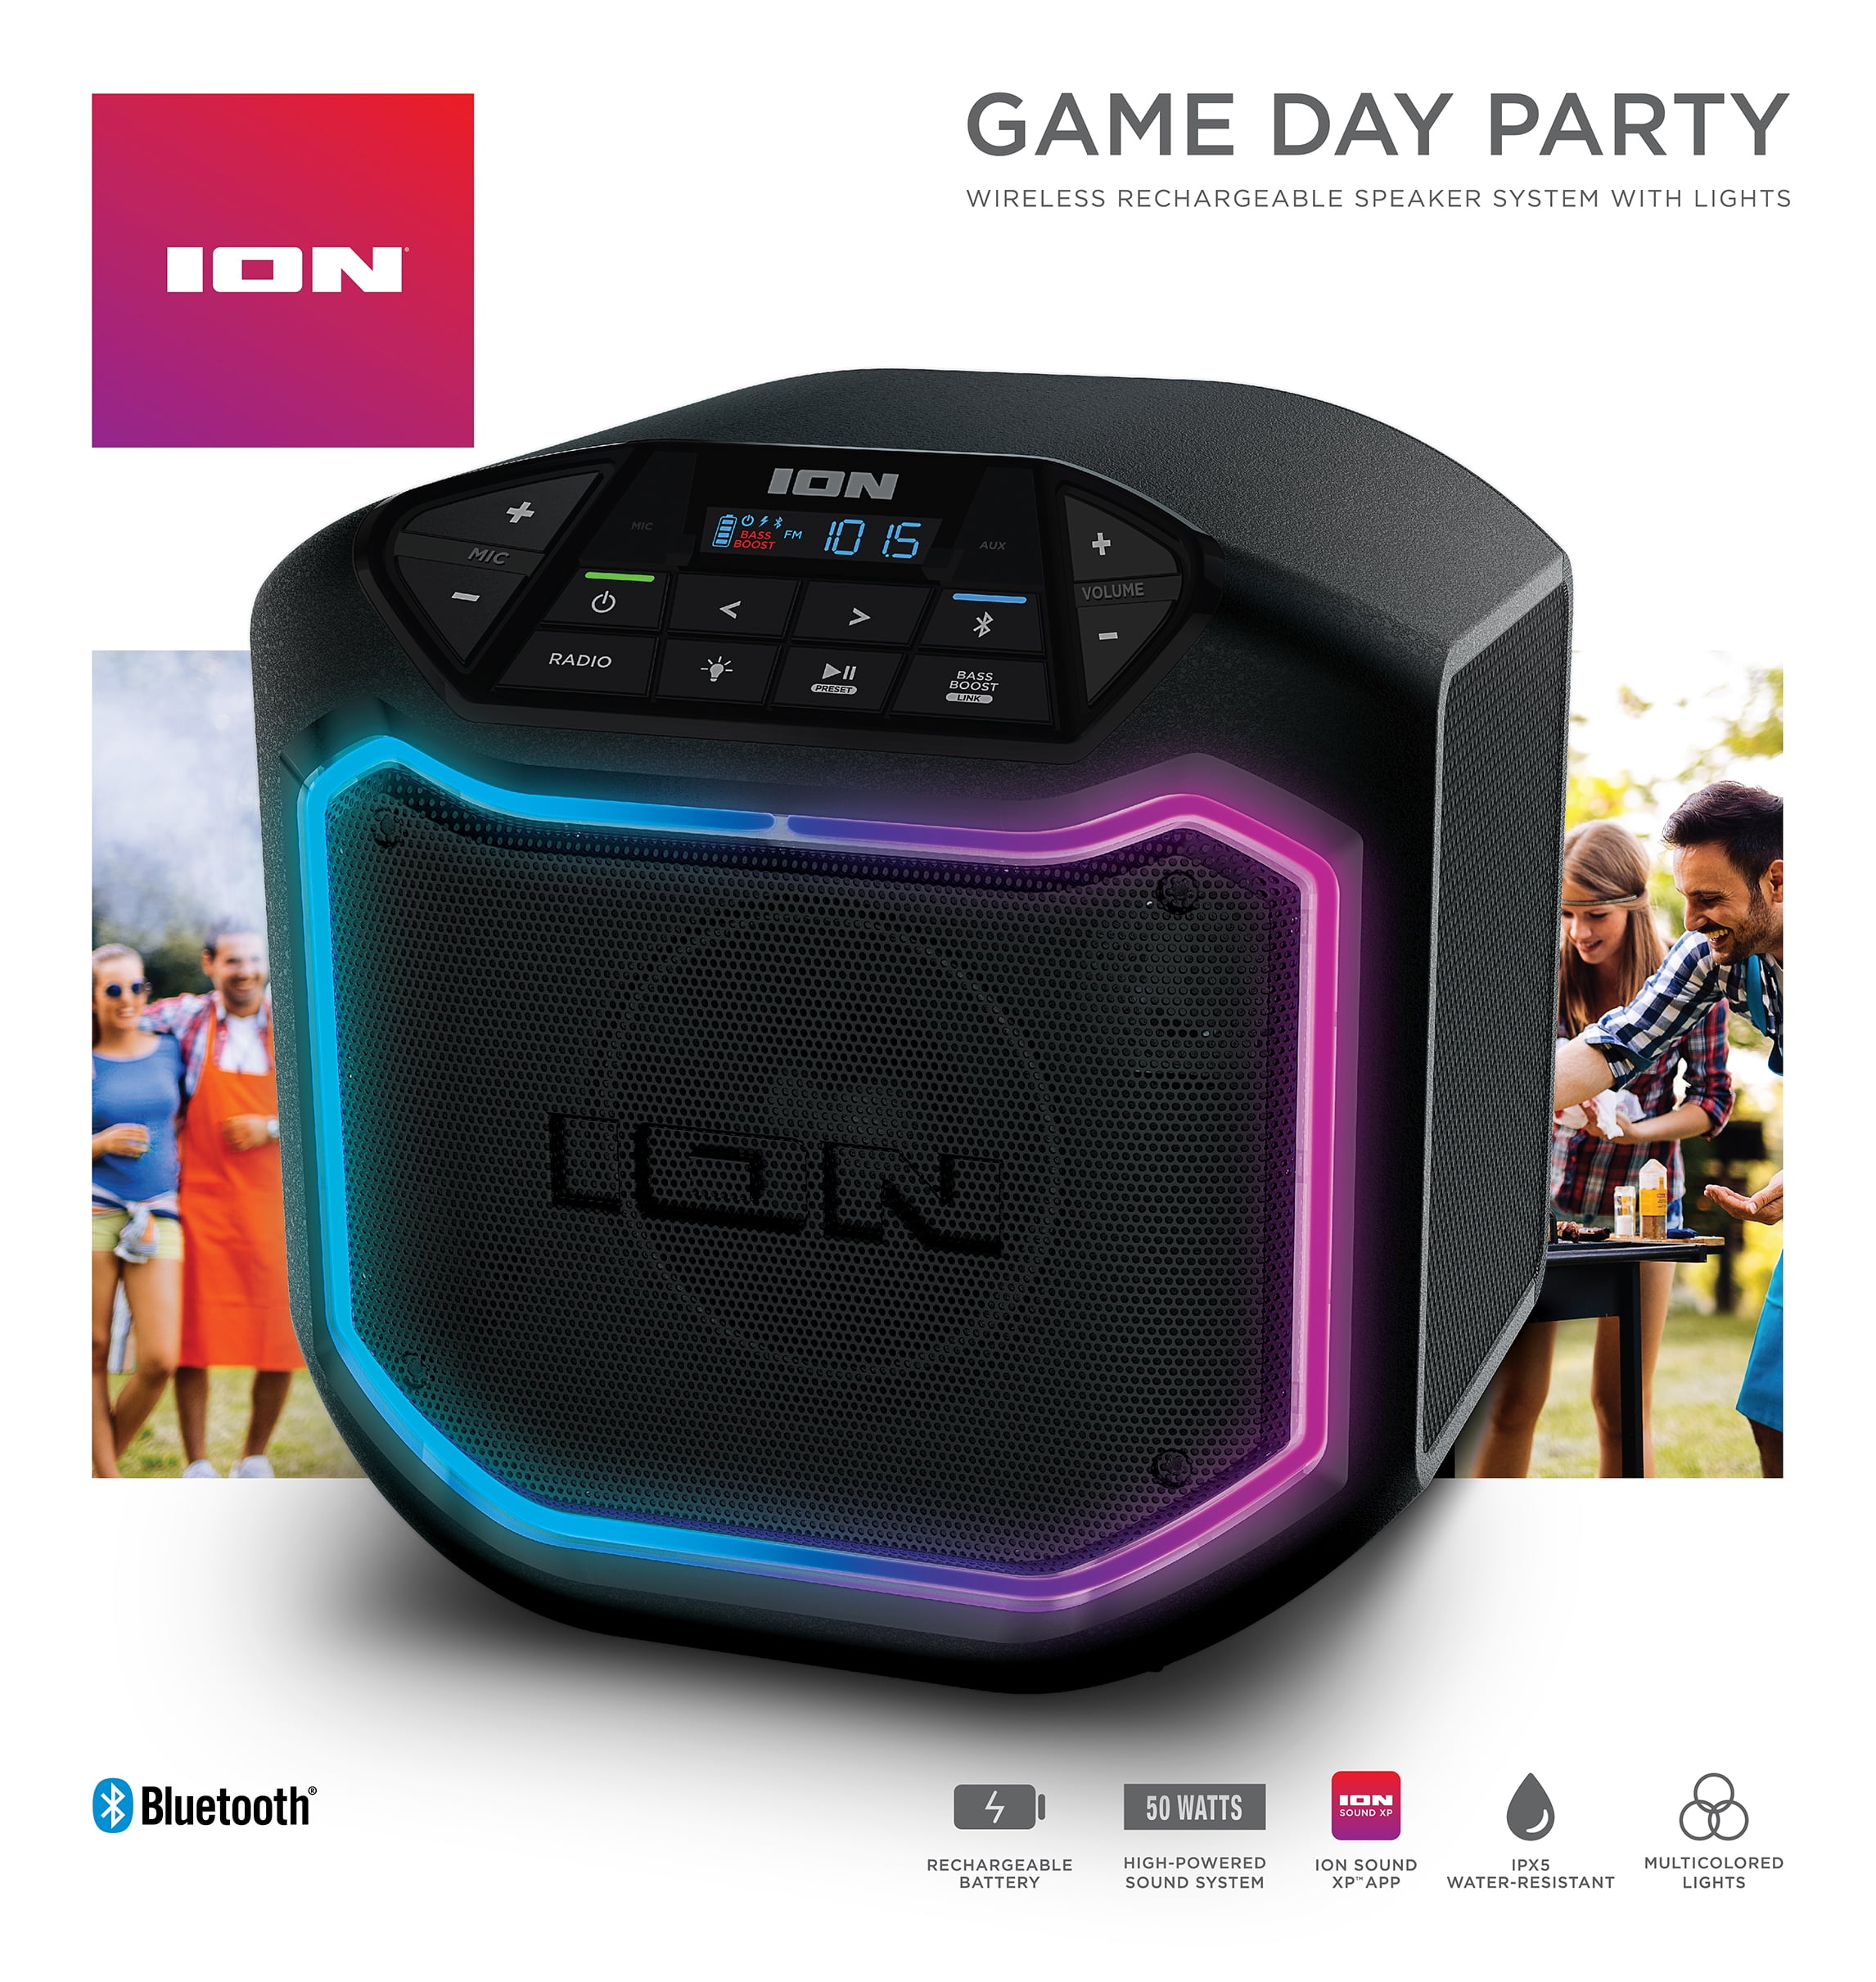 Ion game day party speaker